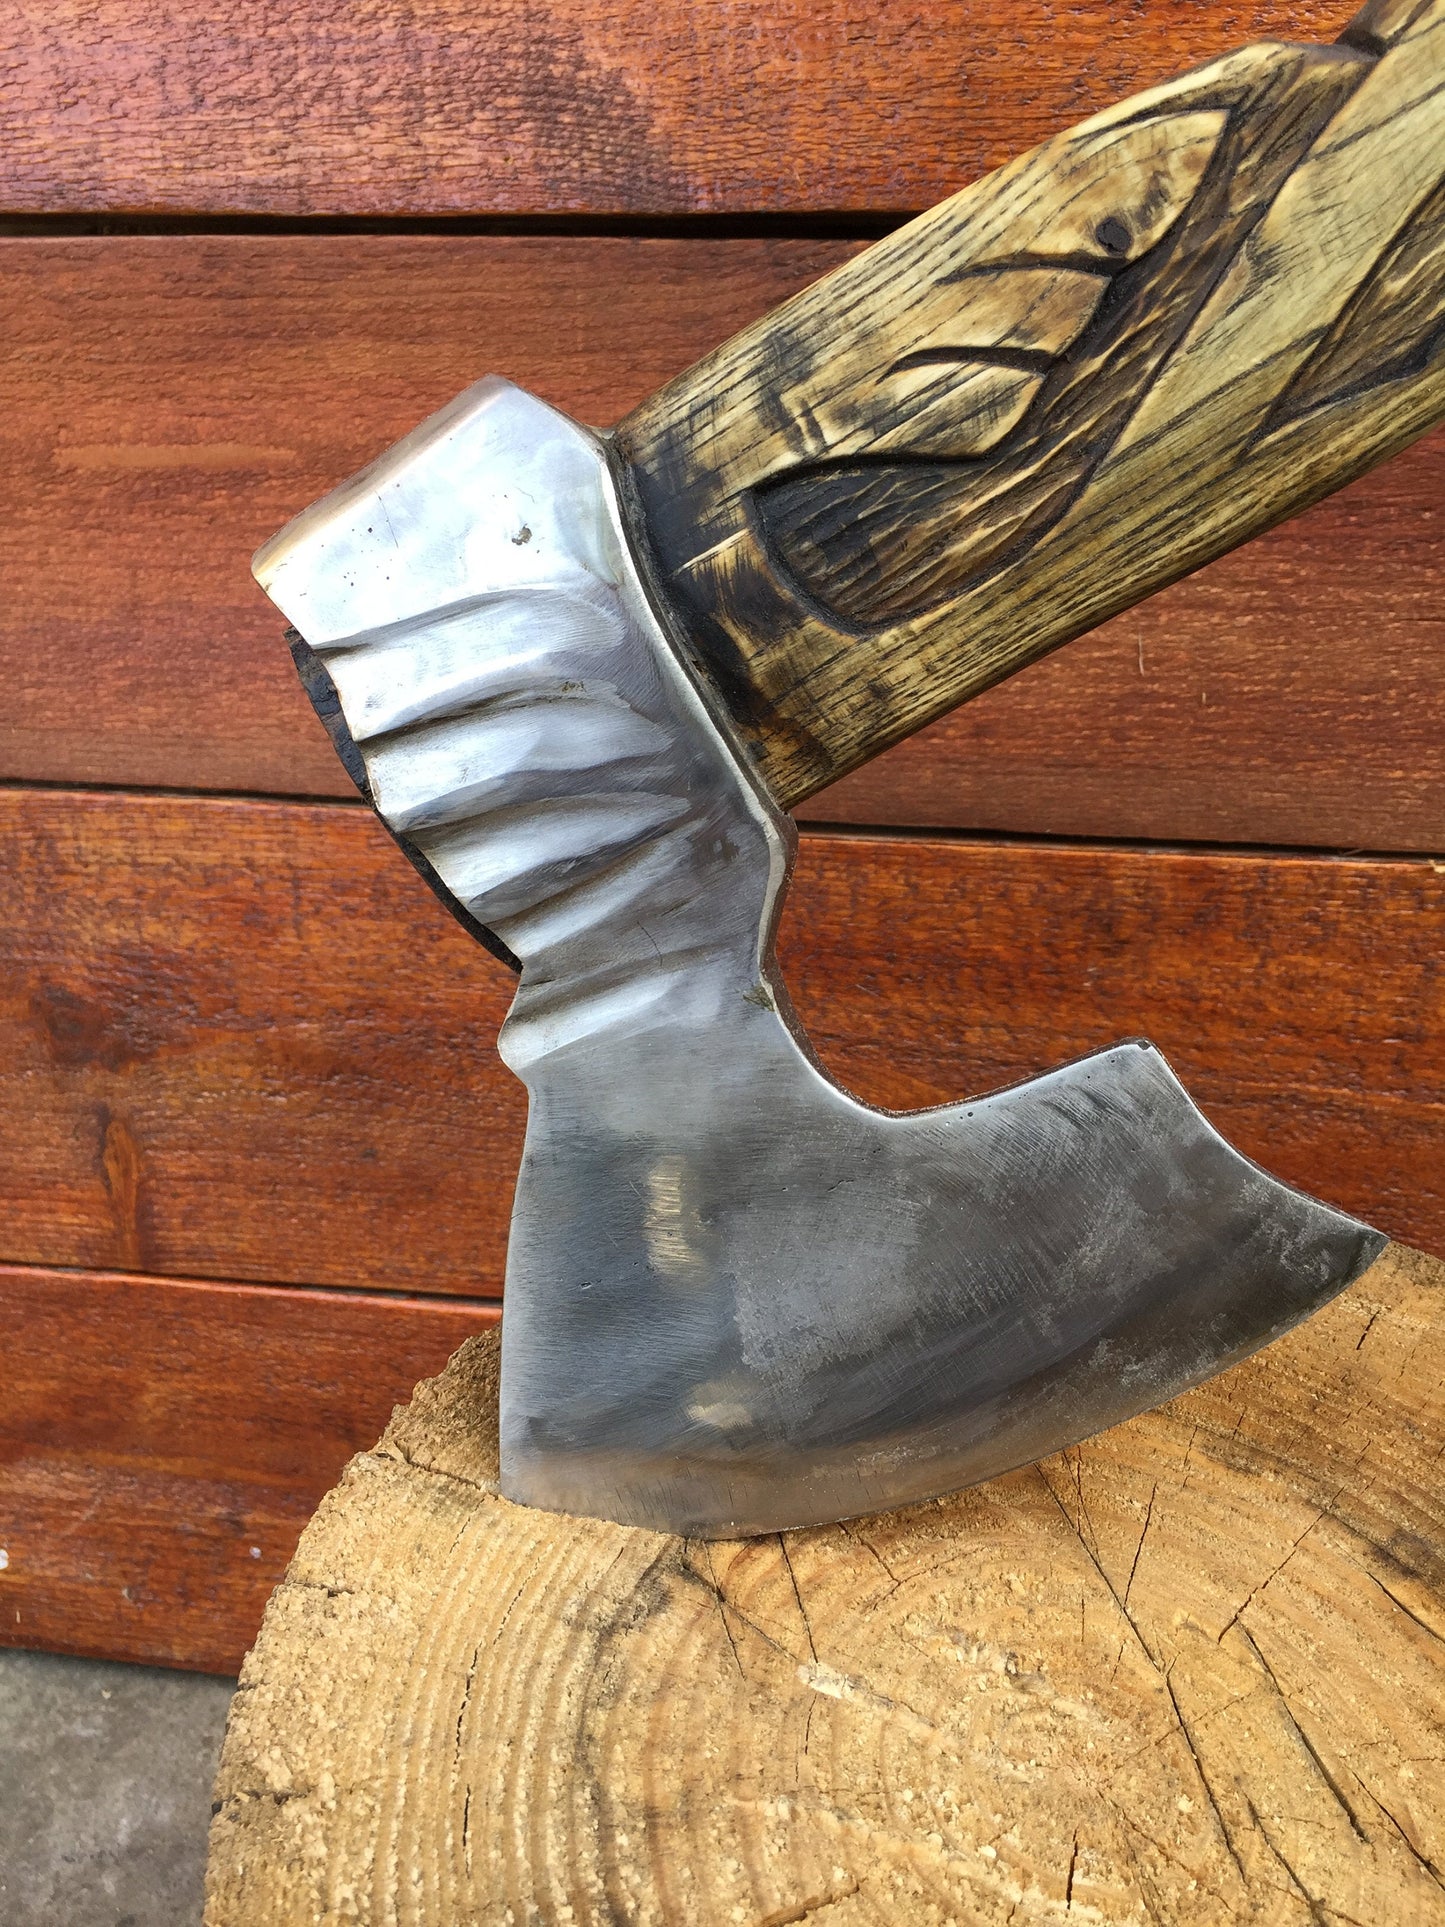 6th anniversary gift, medieval axe, viking axe, iron gift for him, best man gift, birthday gift, hatchet, tools, mens gifts, gifts for men